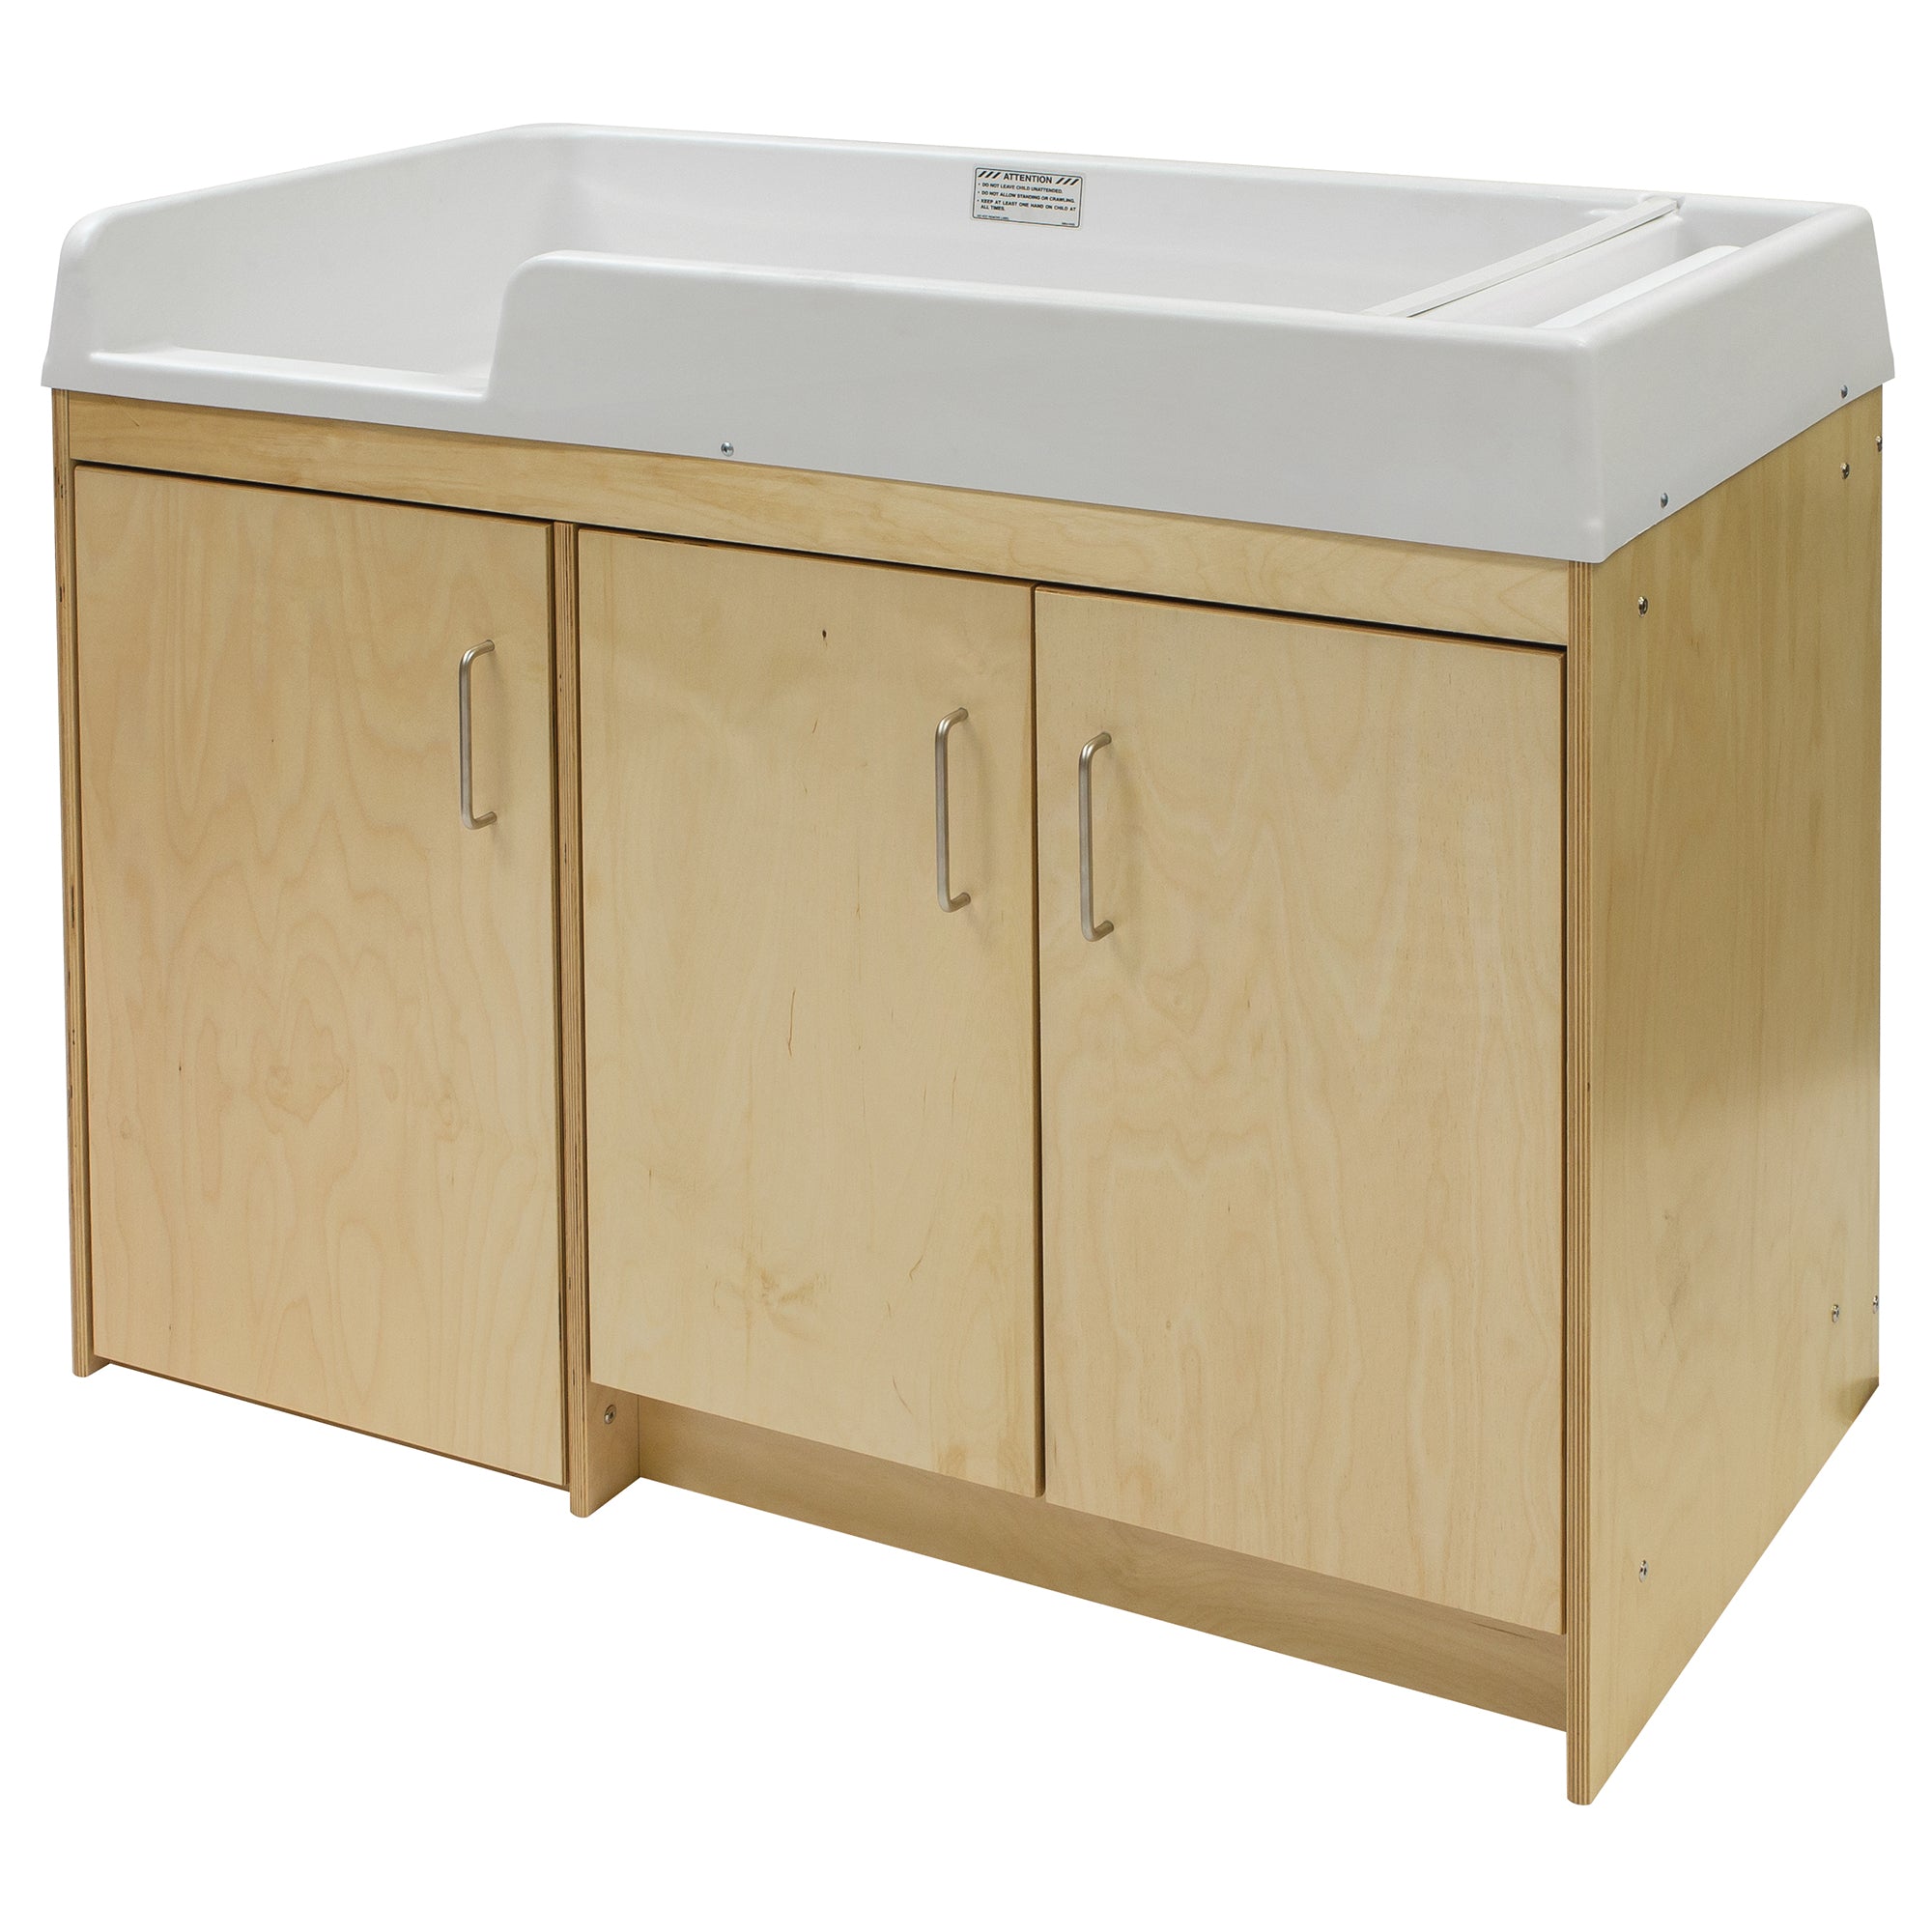 Birch Plywood Infant Changing Table